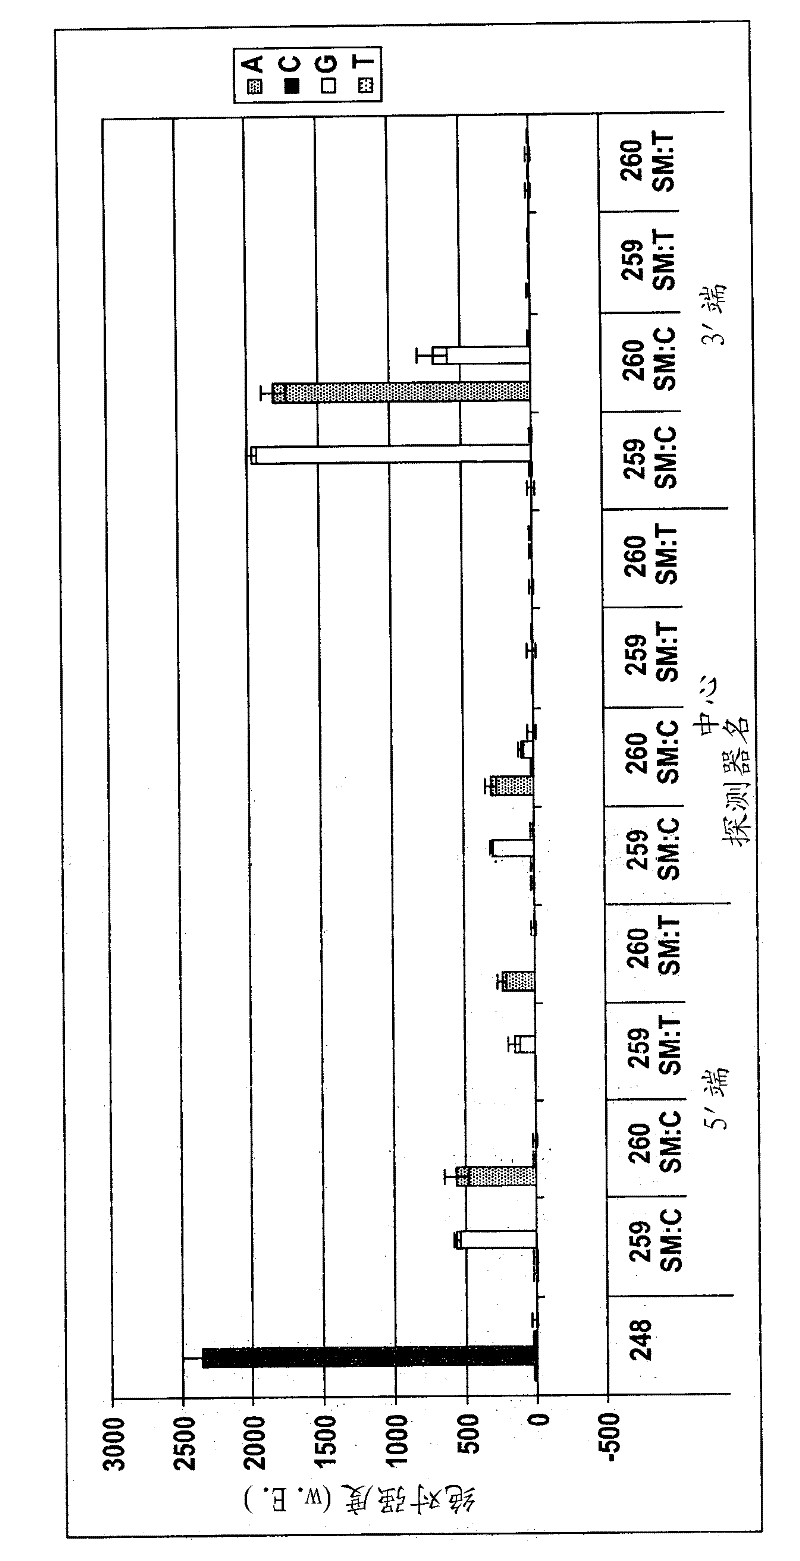 Method for concentrating sample constituents and amplifying nucleic acids